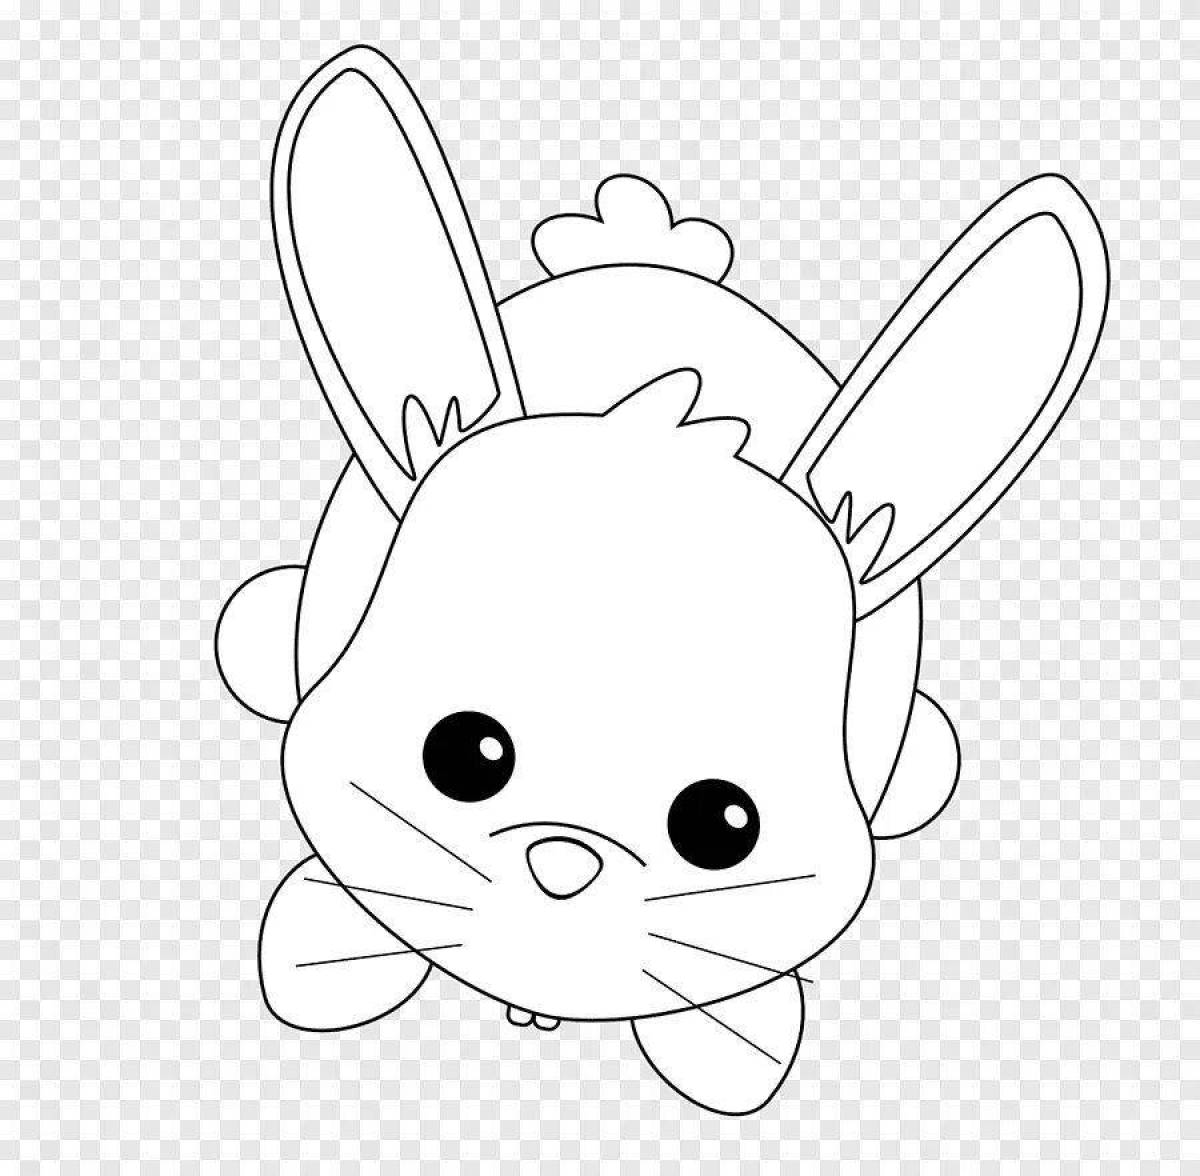 Coloring page magic rabbit with a heart